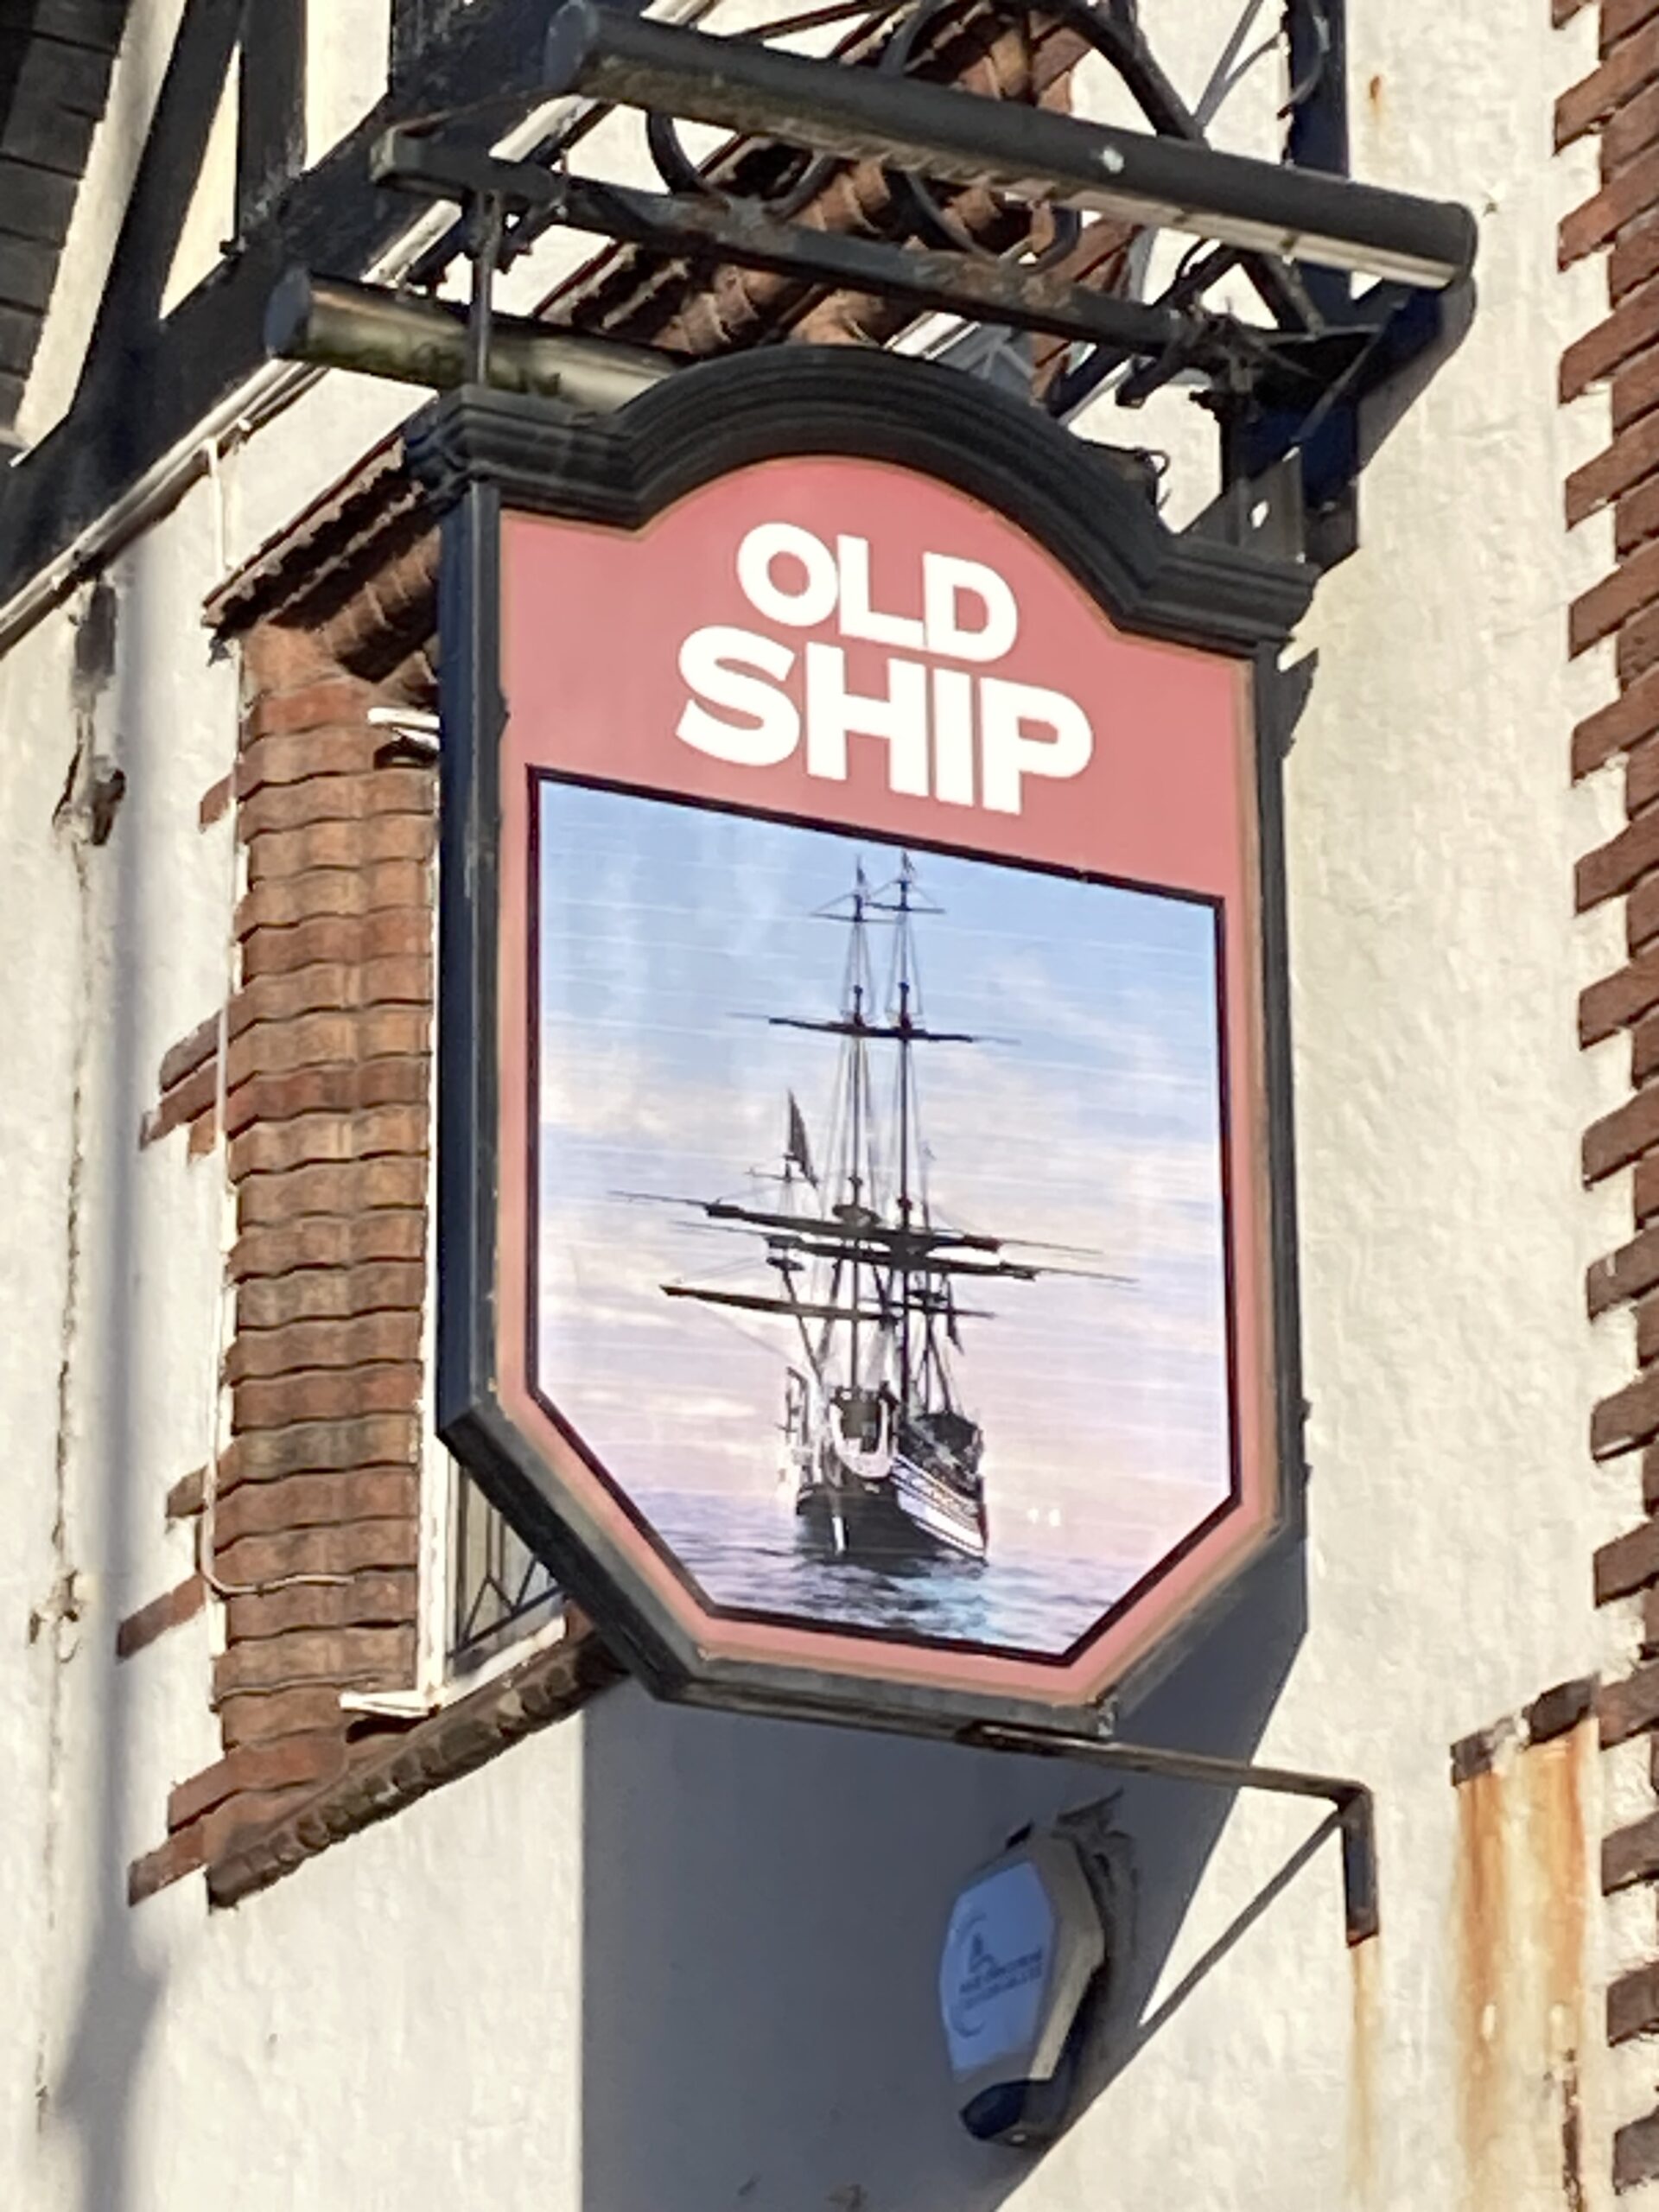 The Old Ship pub on Eastbank Street in Southport. Photo by Andrew Brown Stand up For Southport